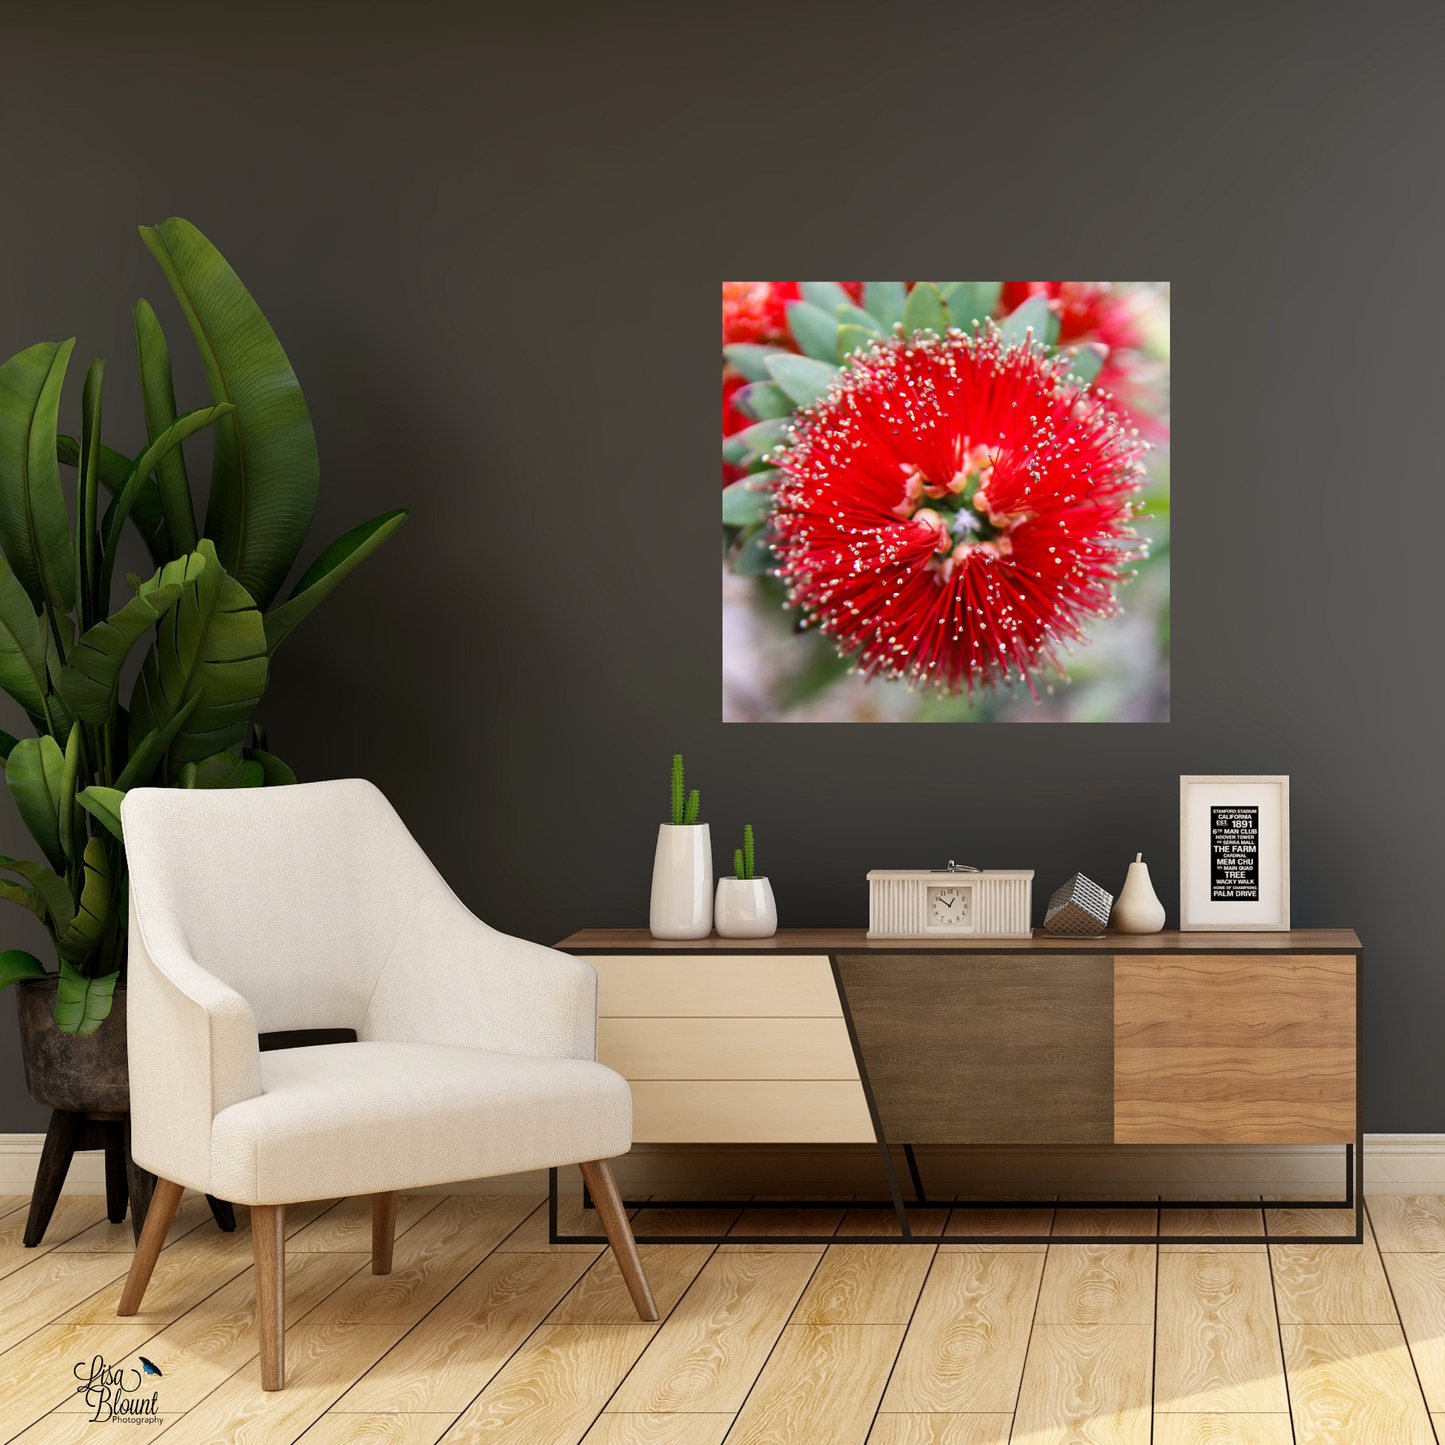 Bright red desert flower art hanging on wall in office area